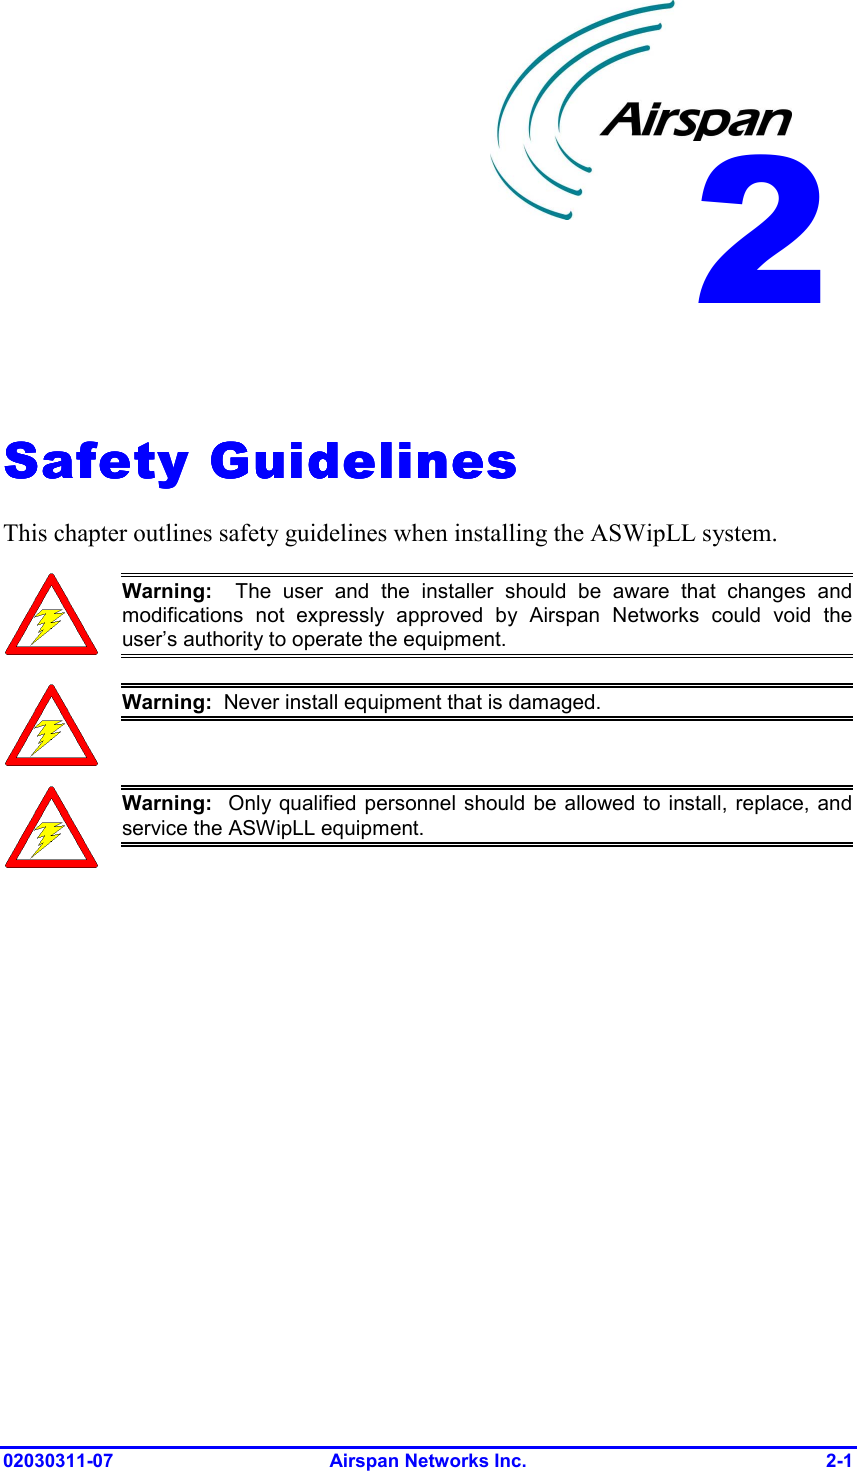  02030311-07 Airspan Networks Inc.  2-1   Safety GuidelinesSafety GuidelinesSafety GuidelinesSafety Guidelines    This chapter outlines safety guidelines when installing the ASWipLL system.  Warning:  The user and the installer should be aware that changes andmodifications not expressly approved by Airspan Networks could void theuser’s authority to operate the equipment.  Warning:  Never install equipment that is damaged.  Warning:  Only qualified personnel should be allowed to install, replace, andservice the ASWipLL equipment.  2 